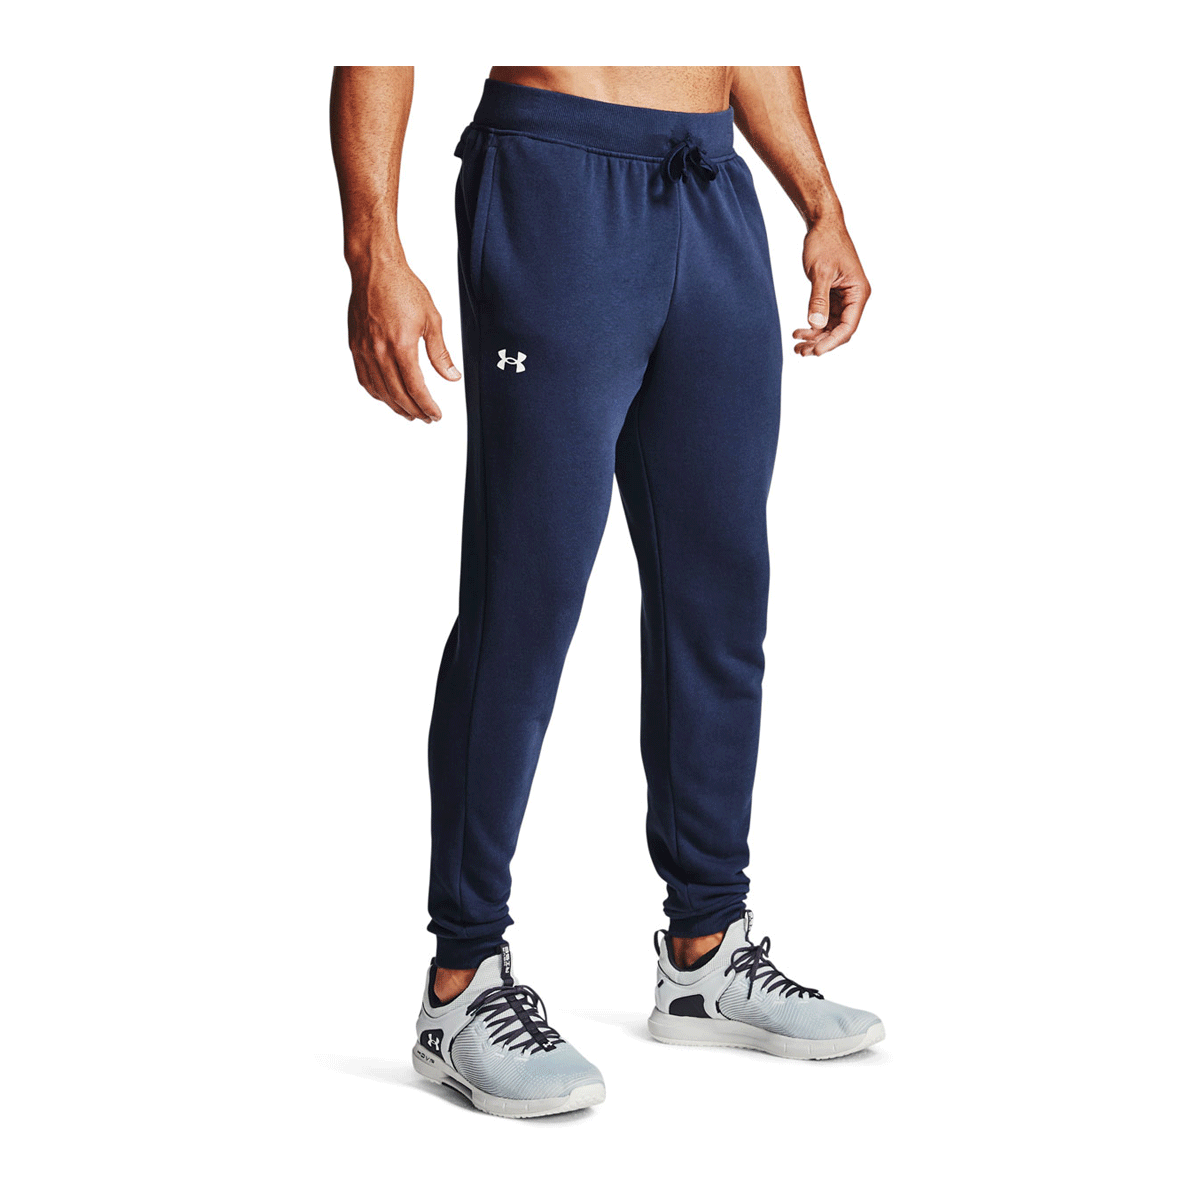 Brighton Track & Field/Cross Country Adult Navy Under Armour Warm-up Pants